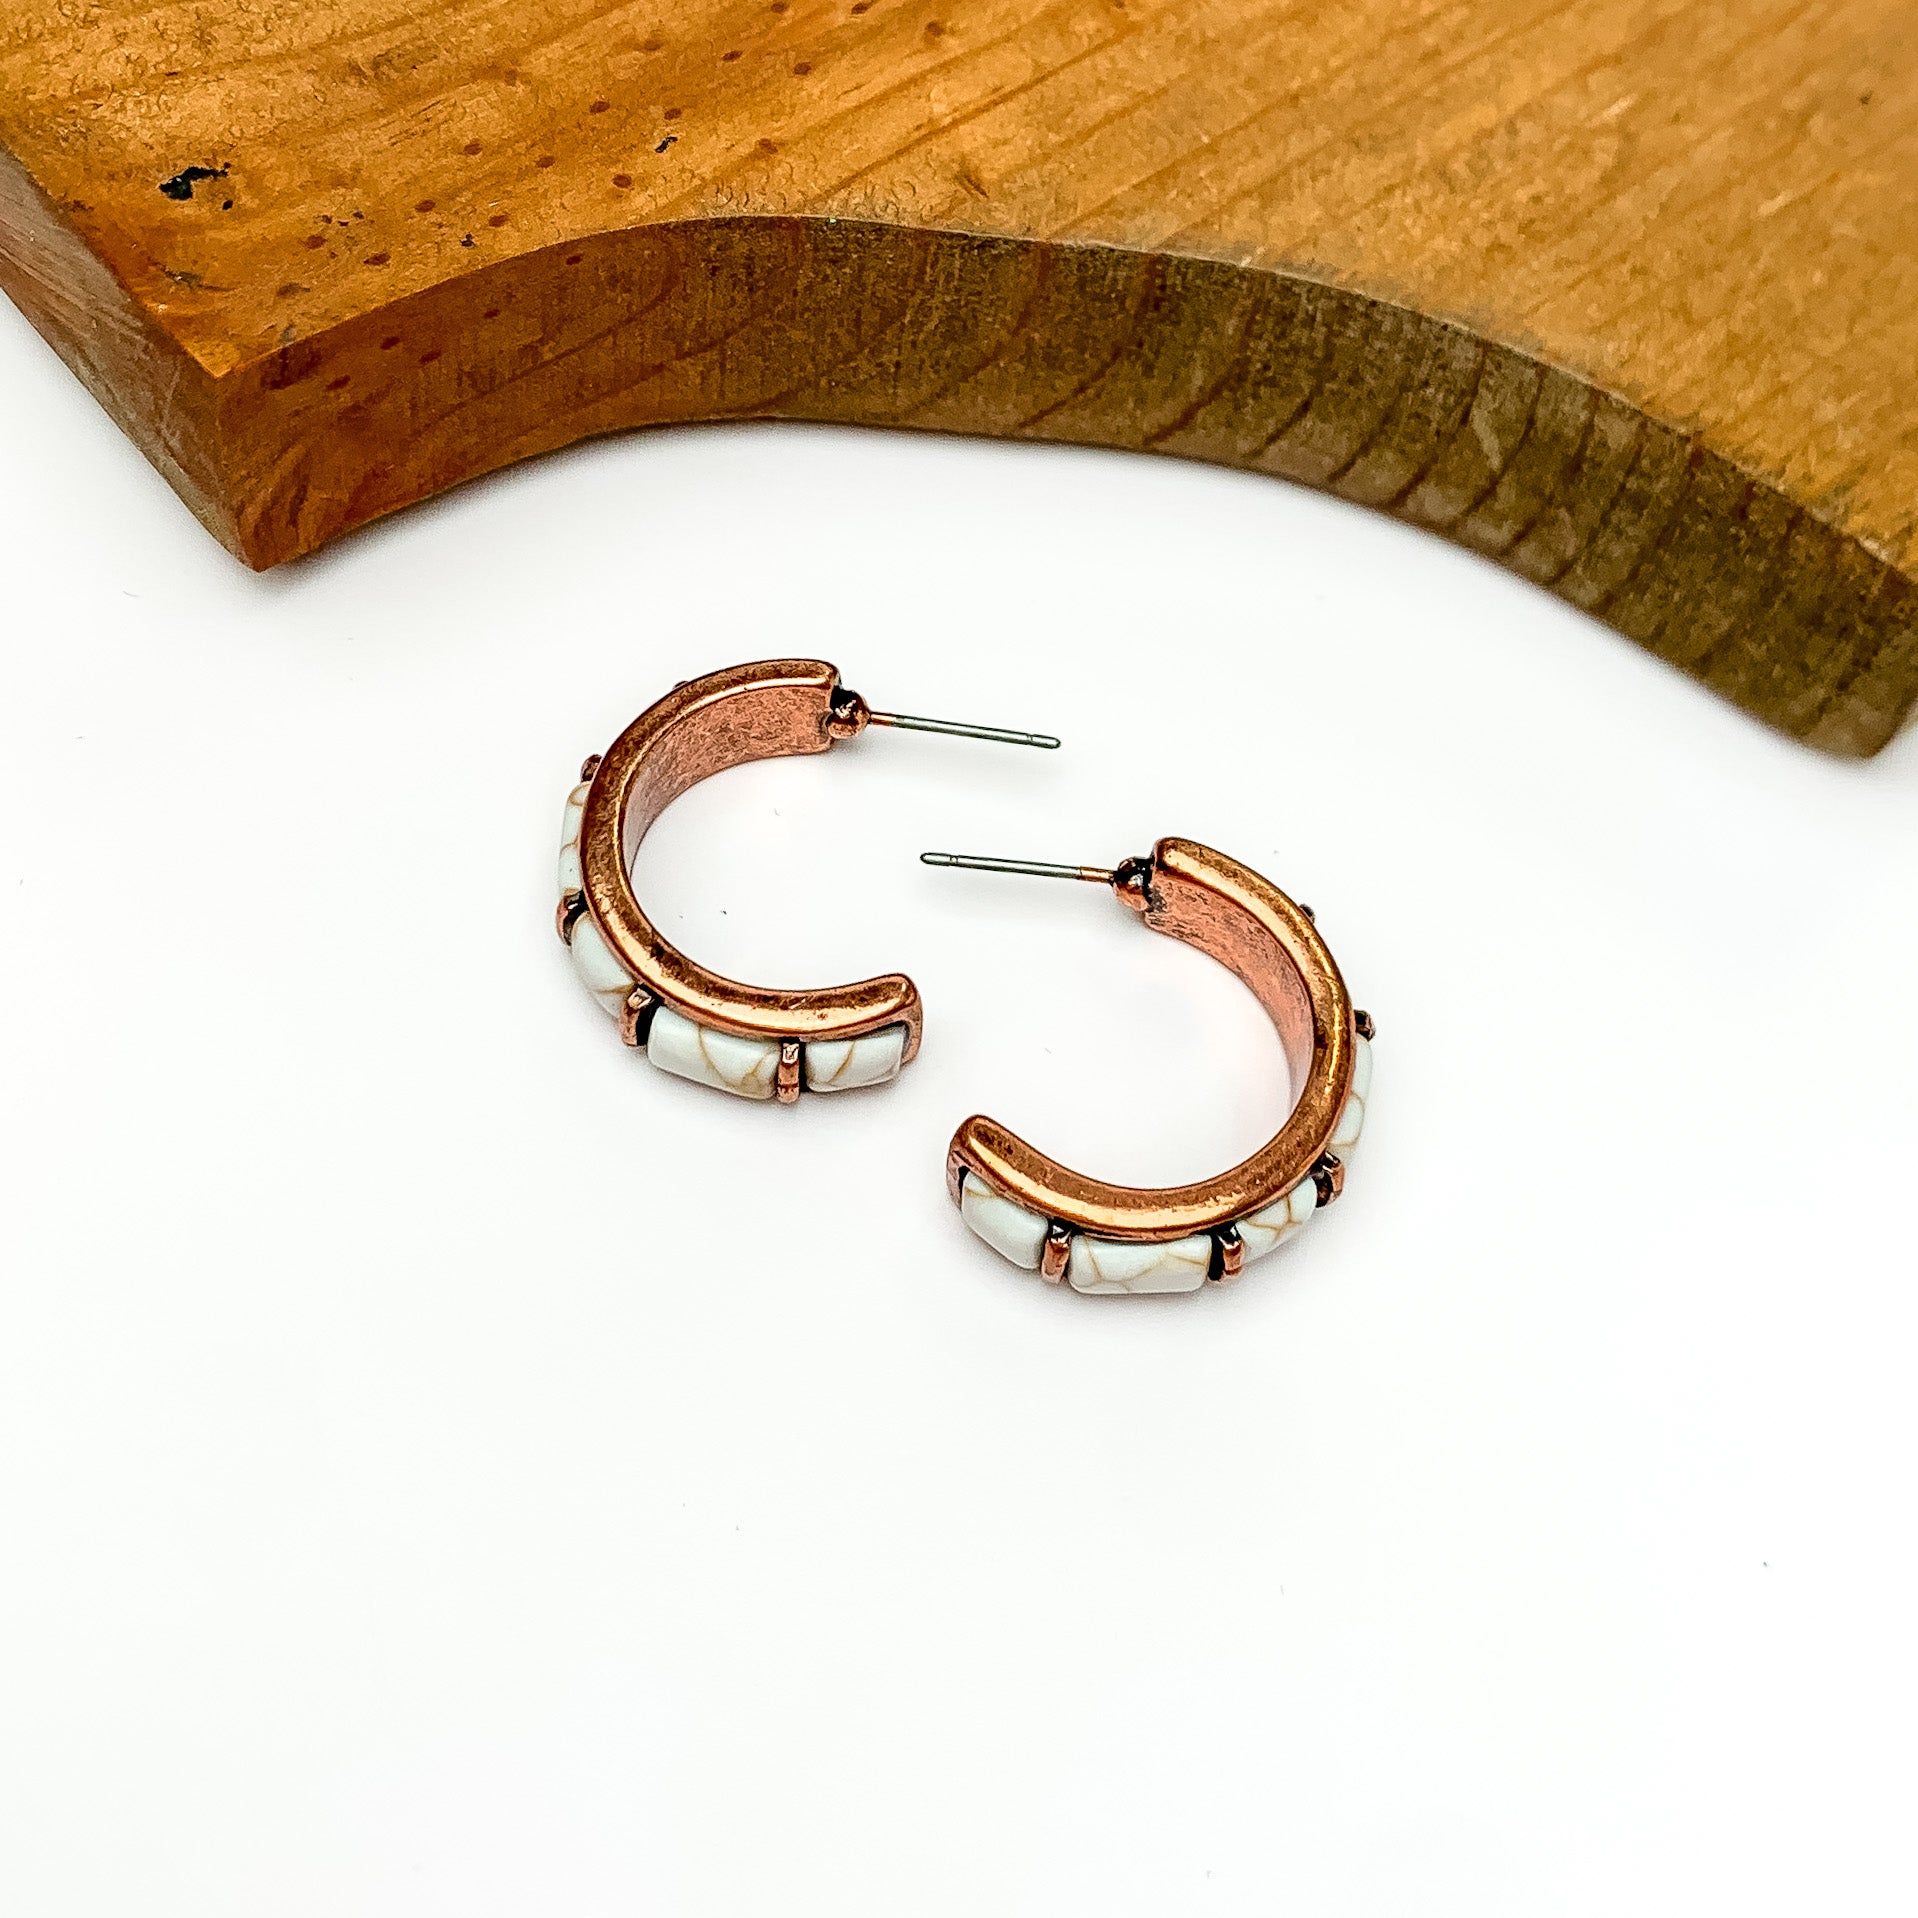 Ivory and copper tone medium hoop earrings. Pictured on a white background with wood at the top.